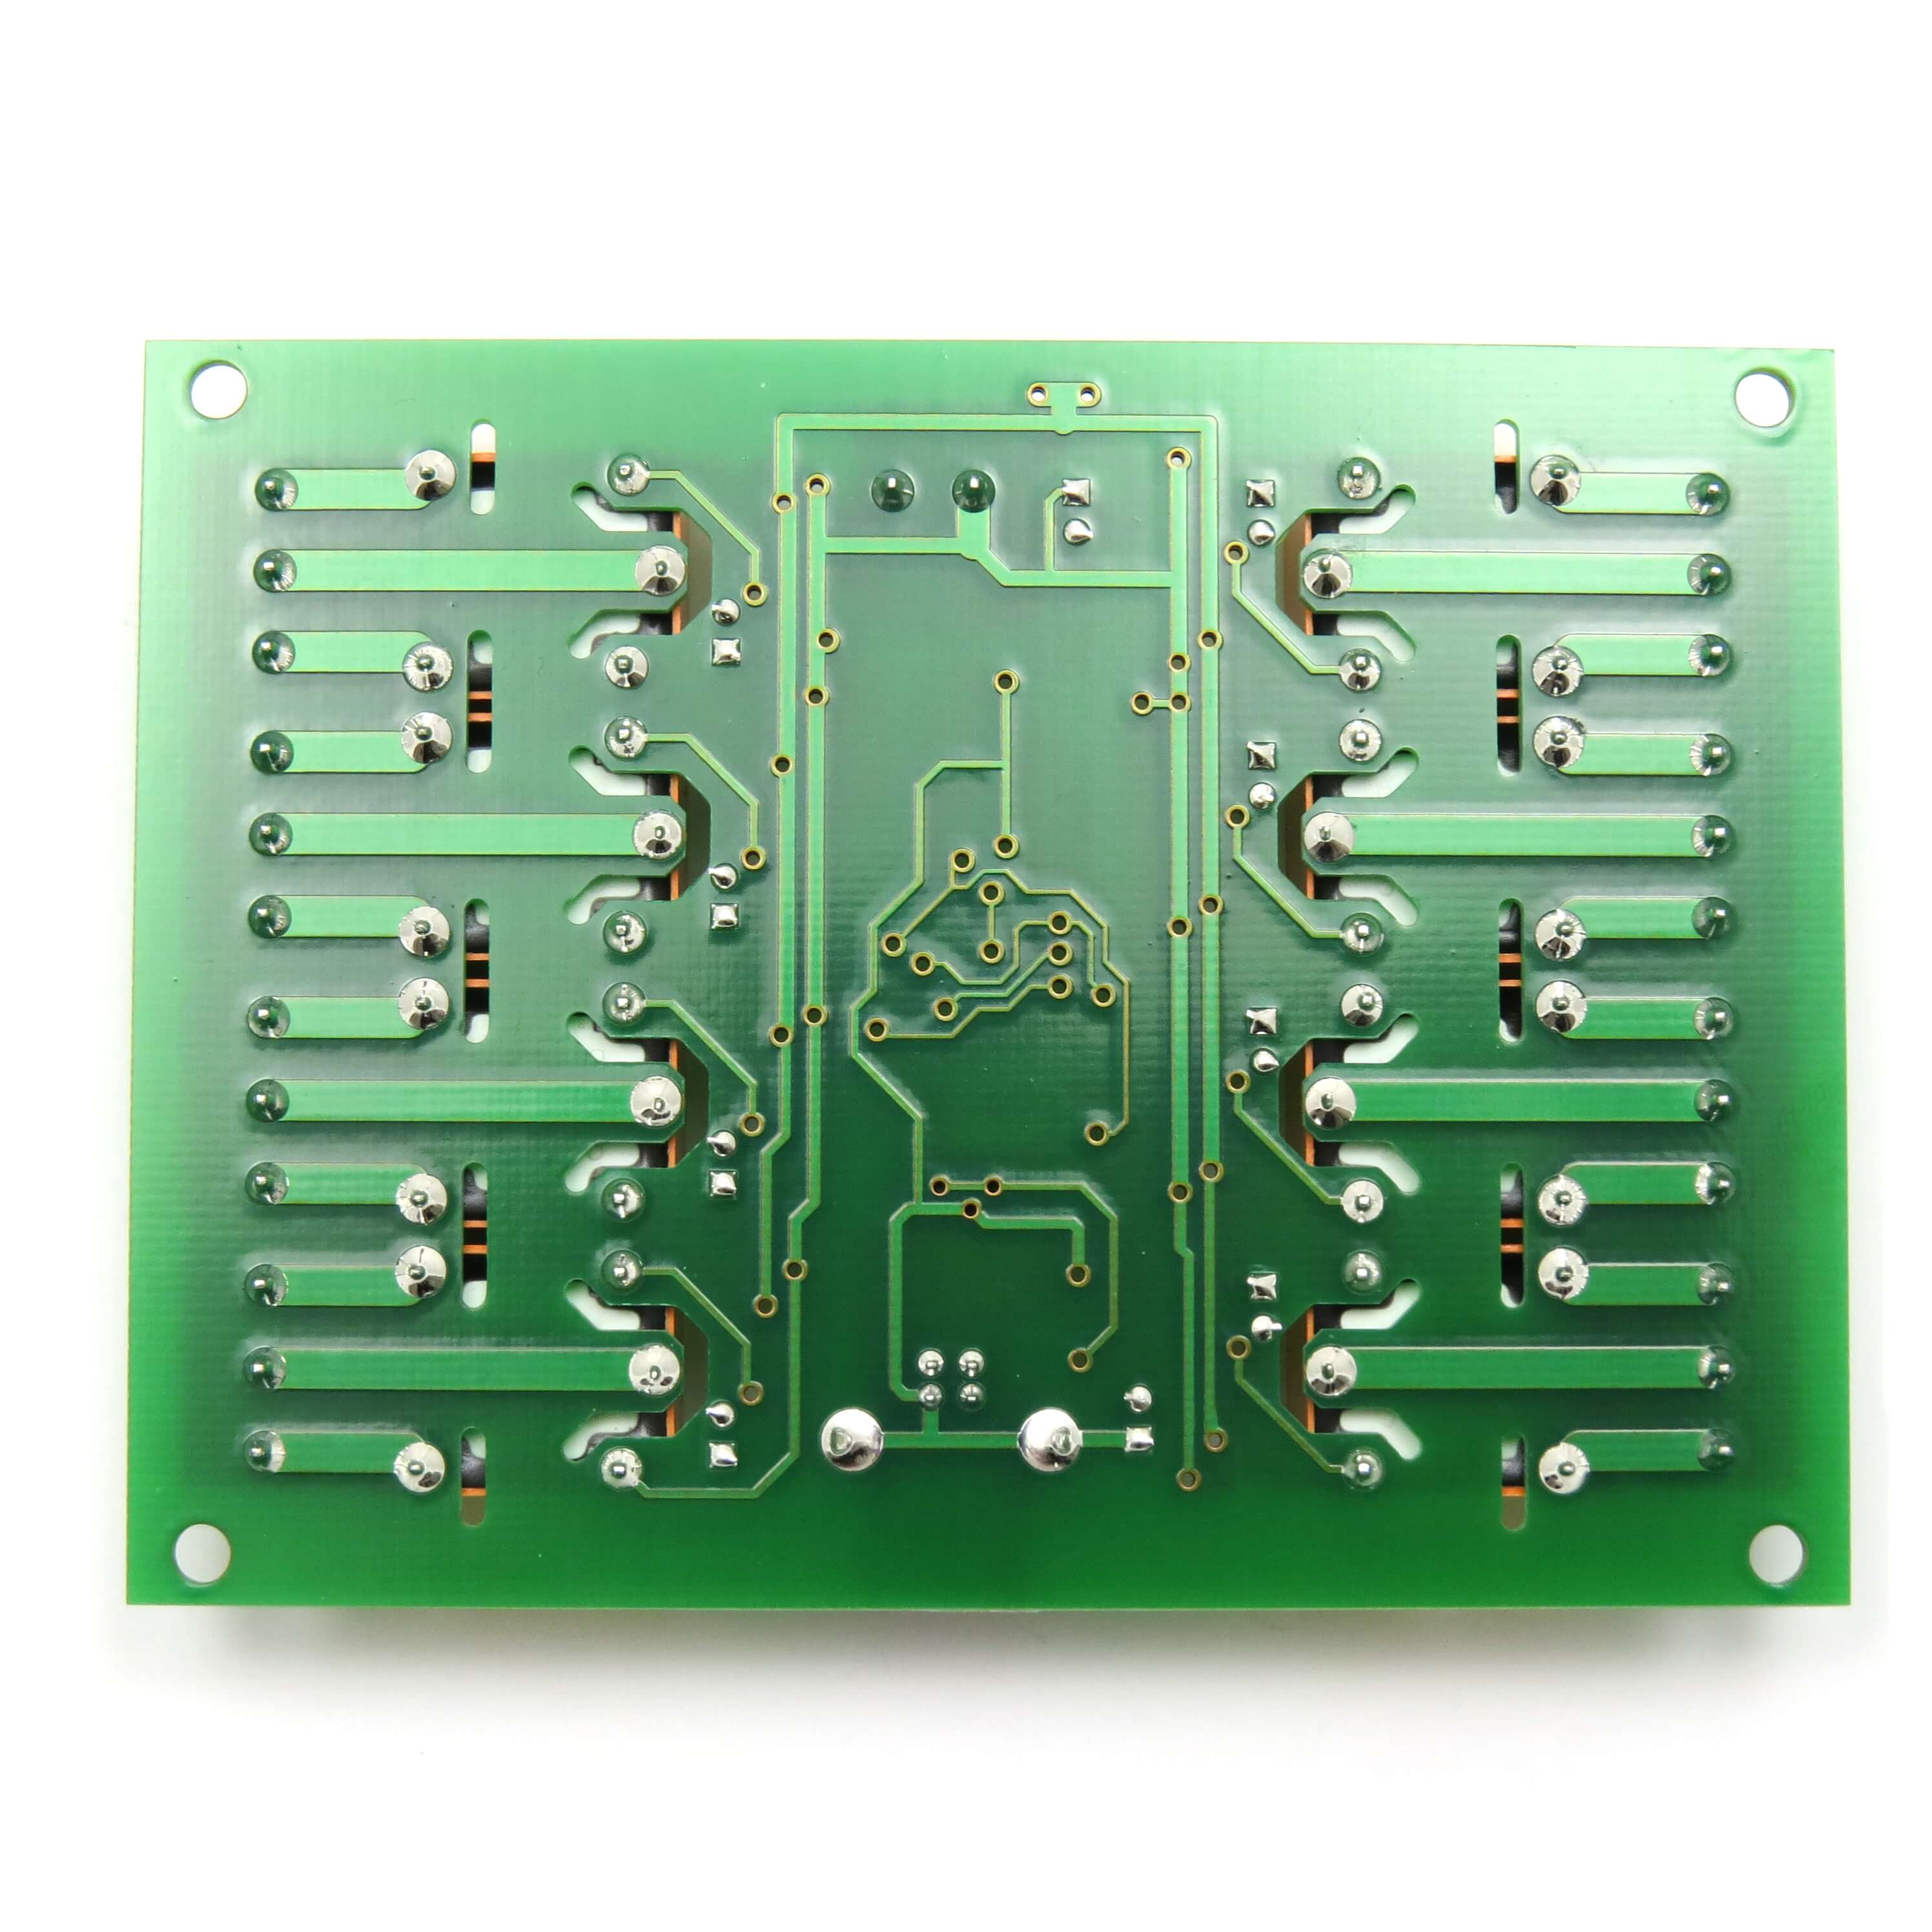 Proxies 12. Плата реле frm.8 Board a0 (арт. 3470066.05). Relay Board 40a. Relay Board i-rb16. 6.24.00011a i/o relay Board.